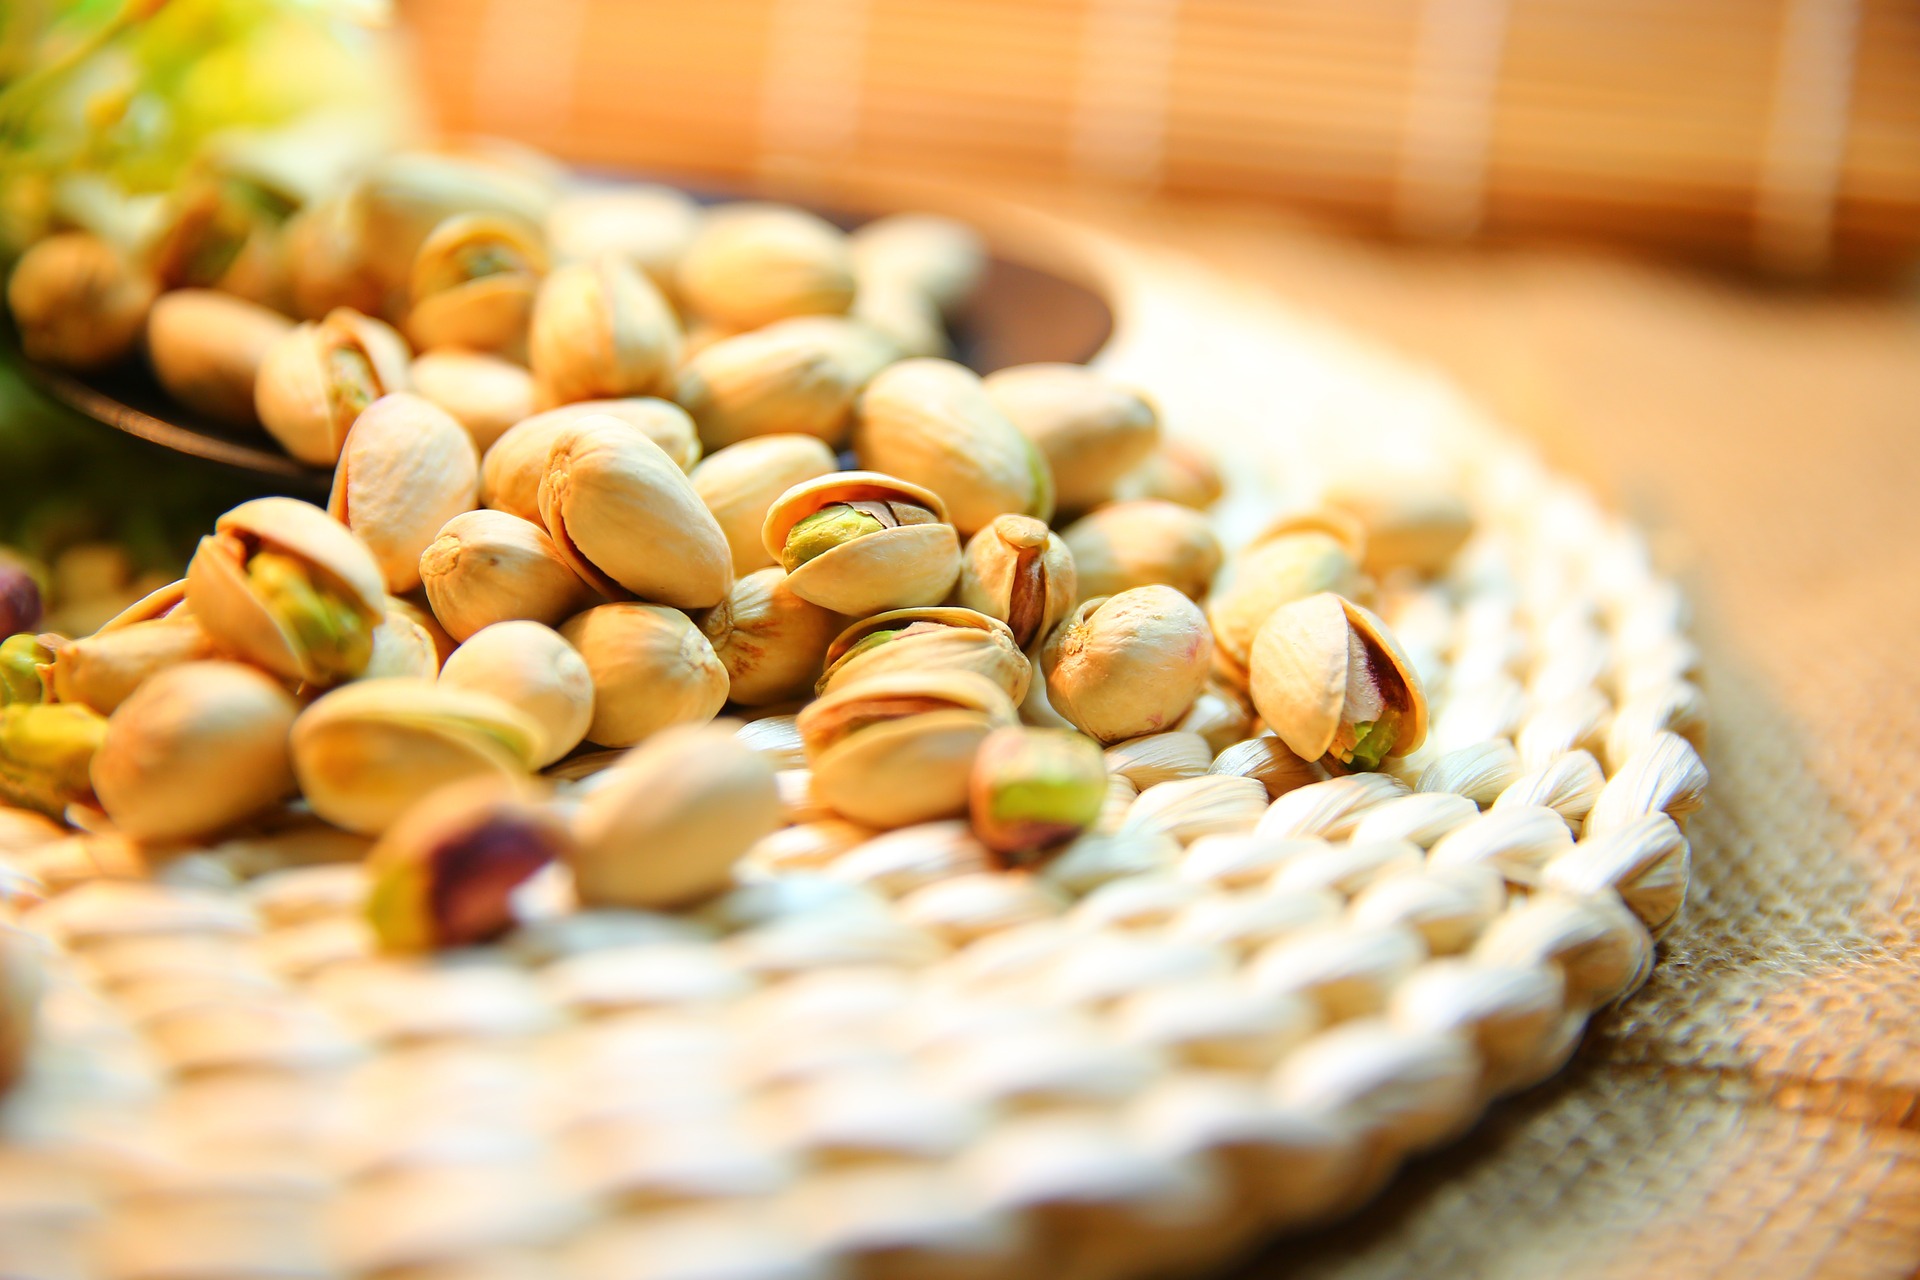 where do pistachio nuts come from